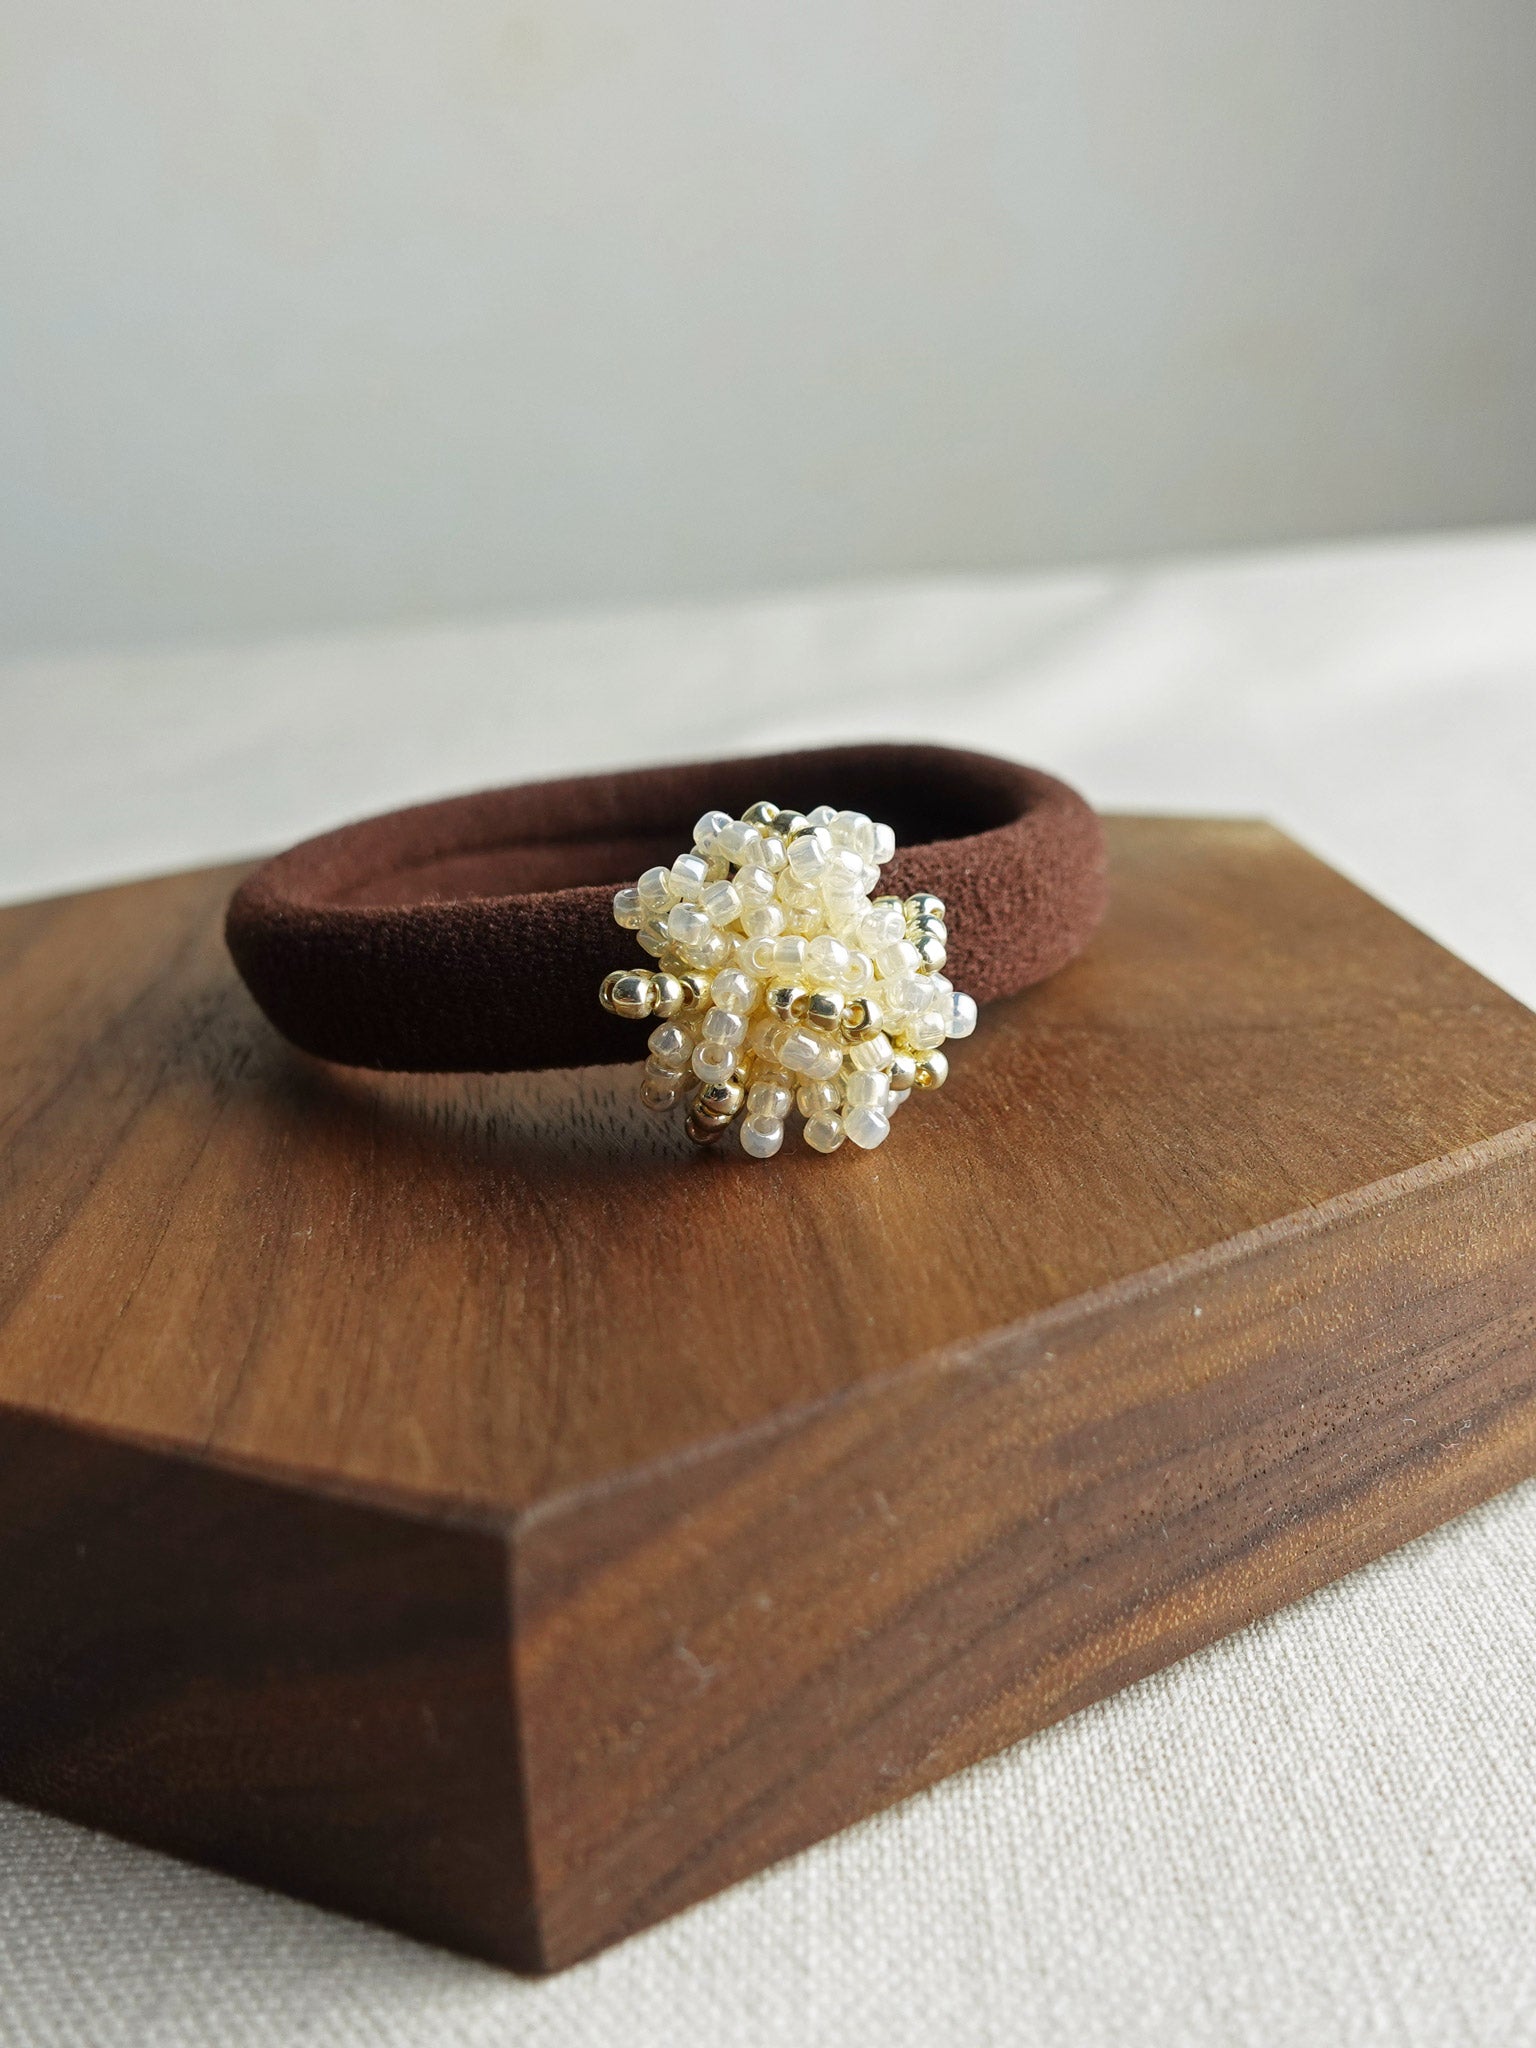 Fluffy Star Dust Hair Tie in Ivory Display